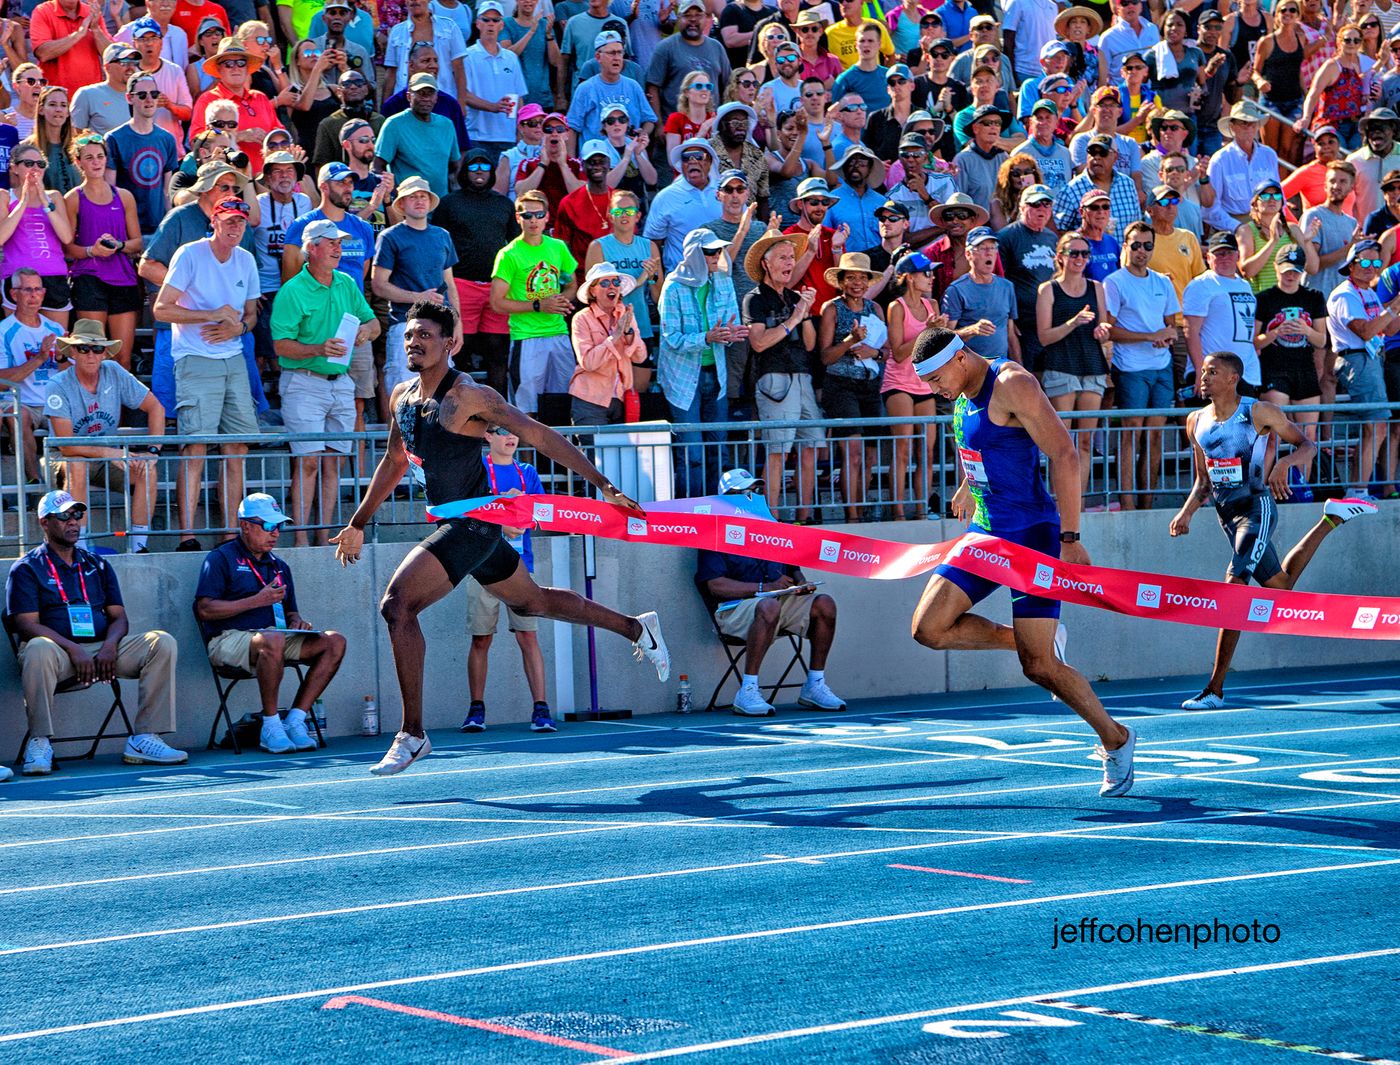 2019-USATF-Outdoor-Champs-day-3-kerley-norman-color-400m--3558---jeff-cohen-photo--web.jpg